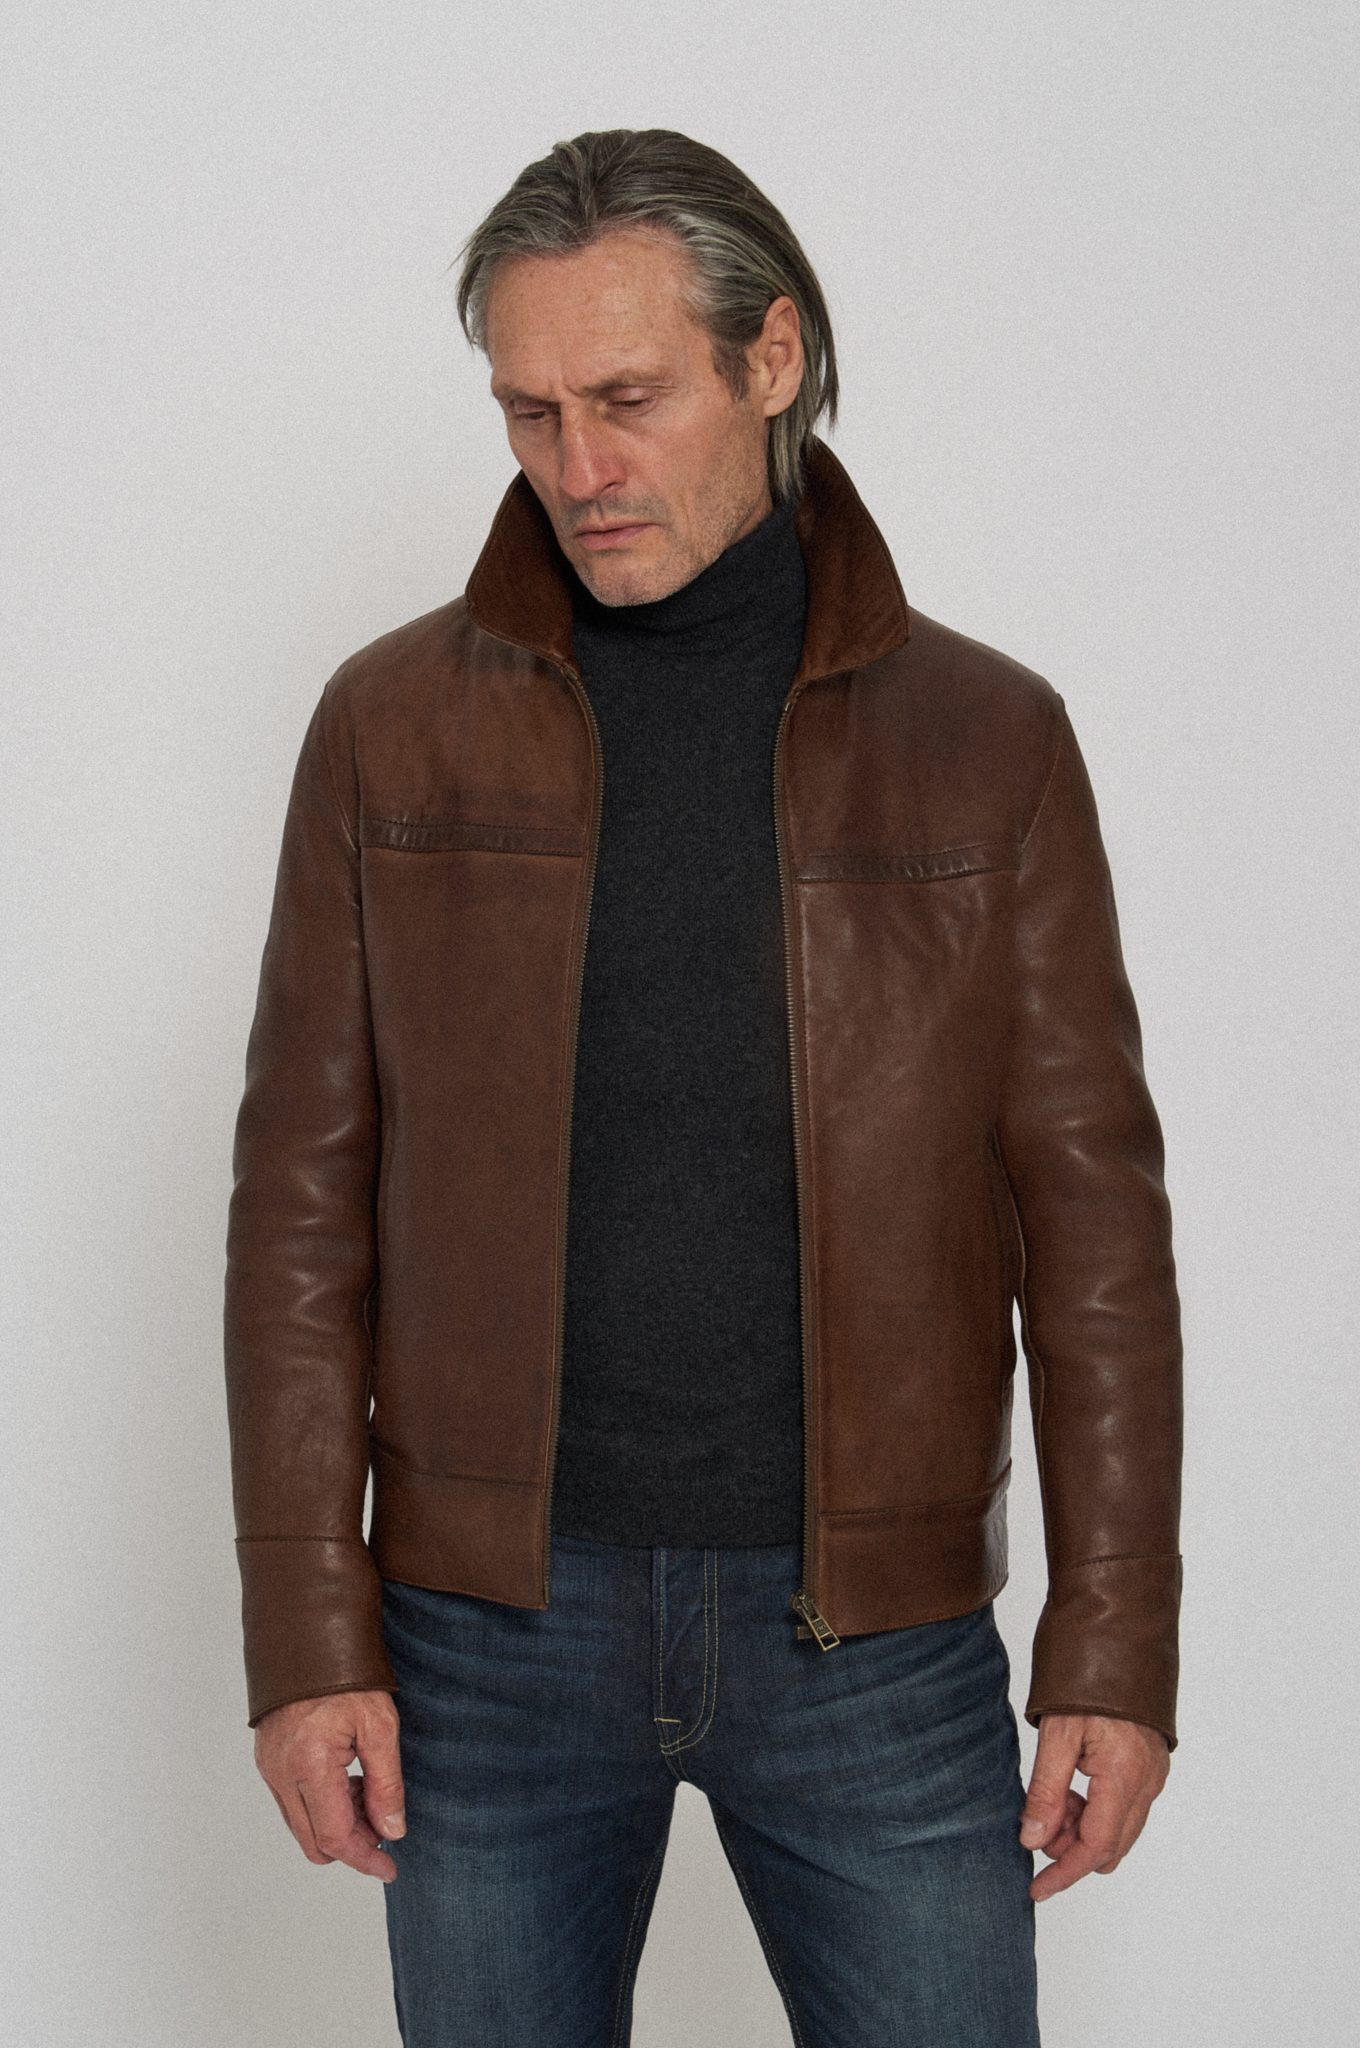 Cromford Leather's classic veg tanned leather jacket